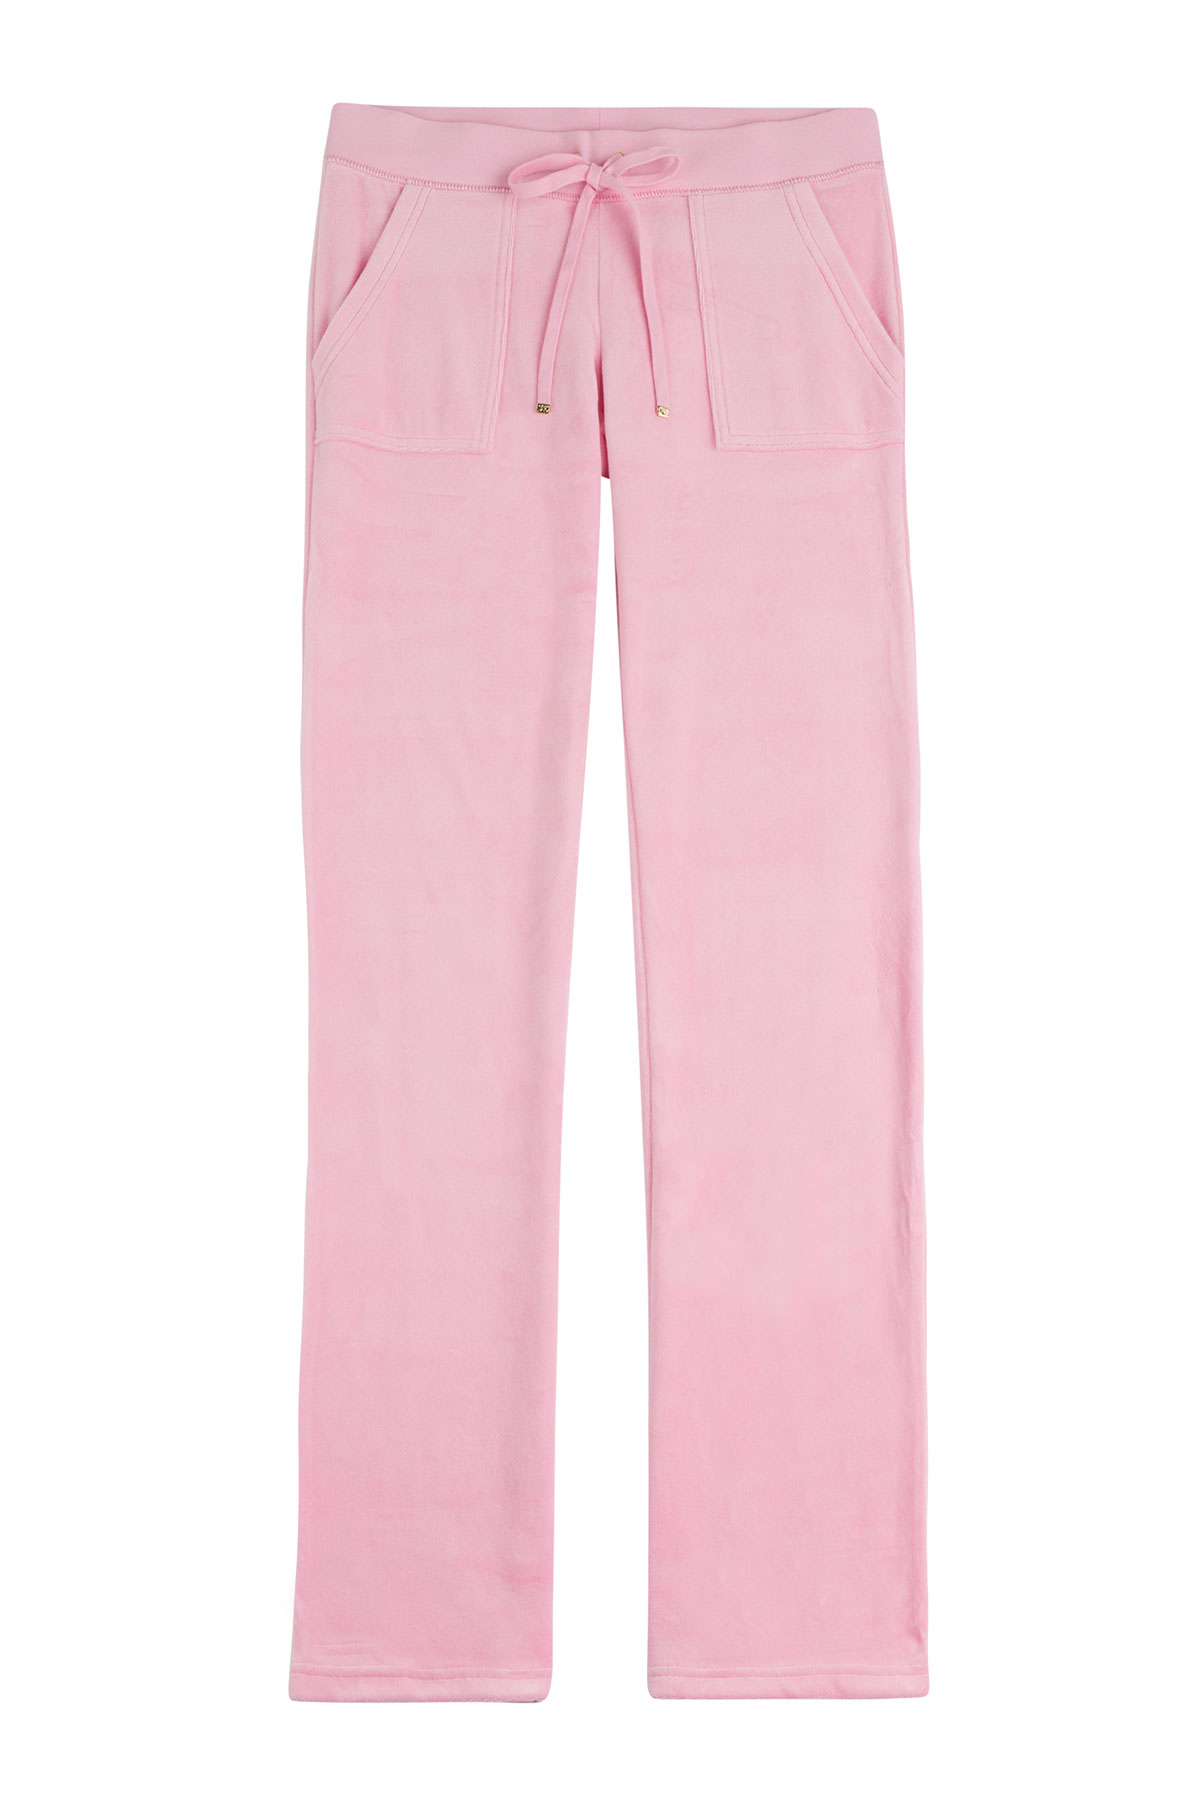 Lyst - Juicy Couture Bling Velour Track Pants - Rose in Pink